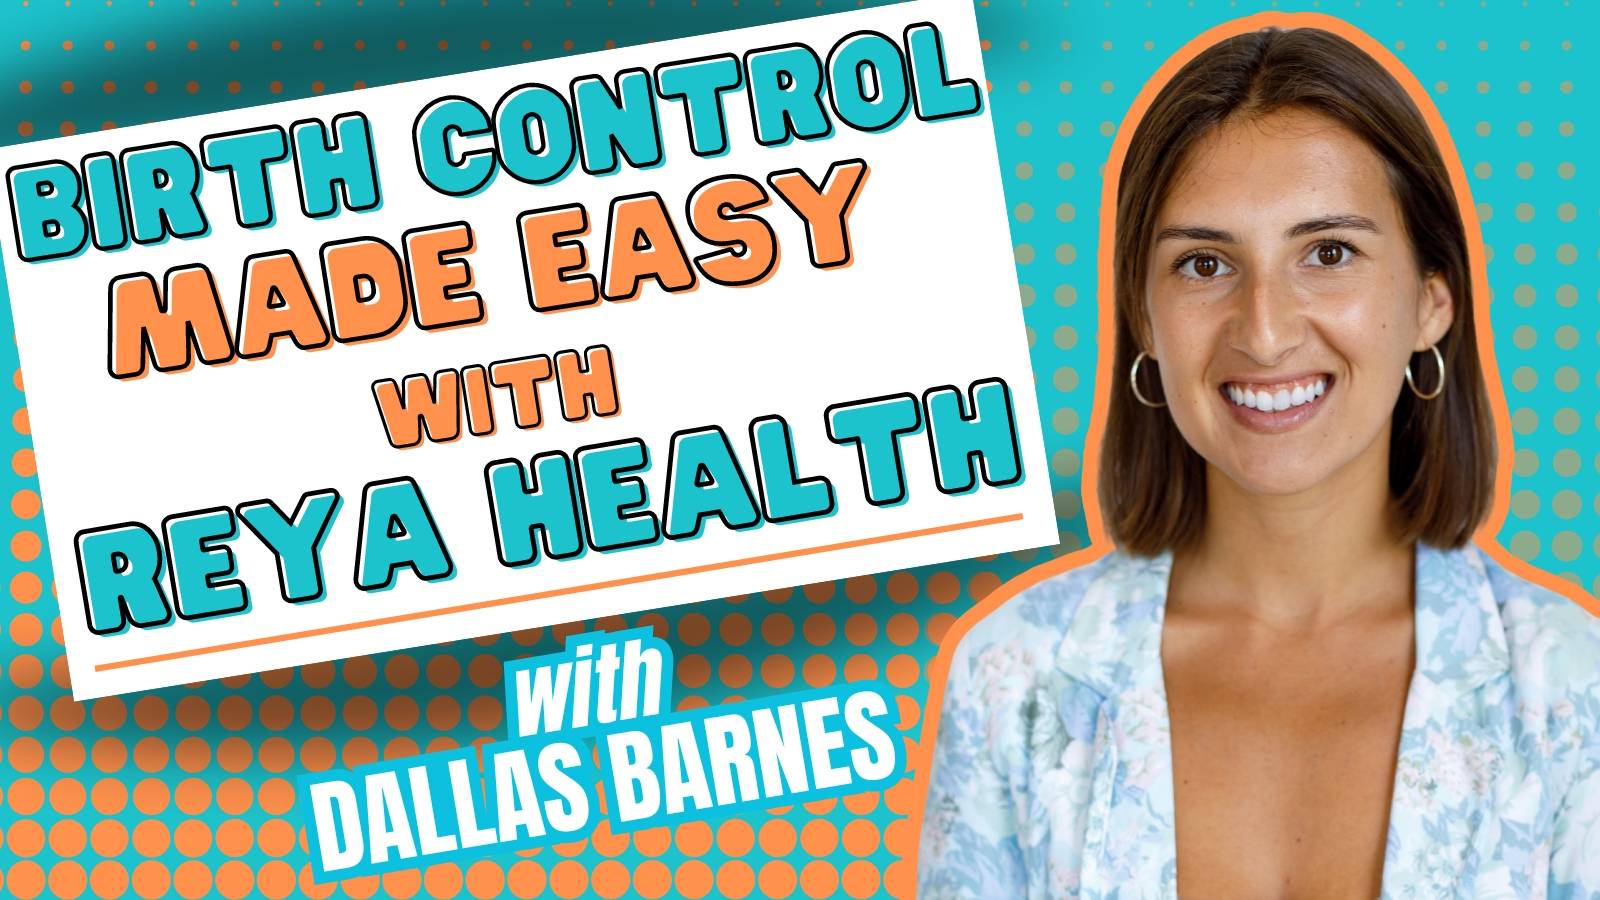 Birth Control Made Easy with the Reya Health App. Founder and CEO Dallas Barnes.